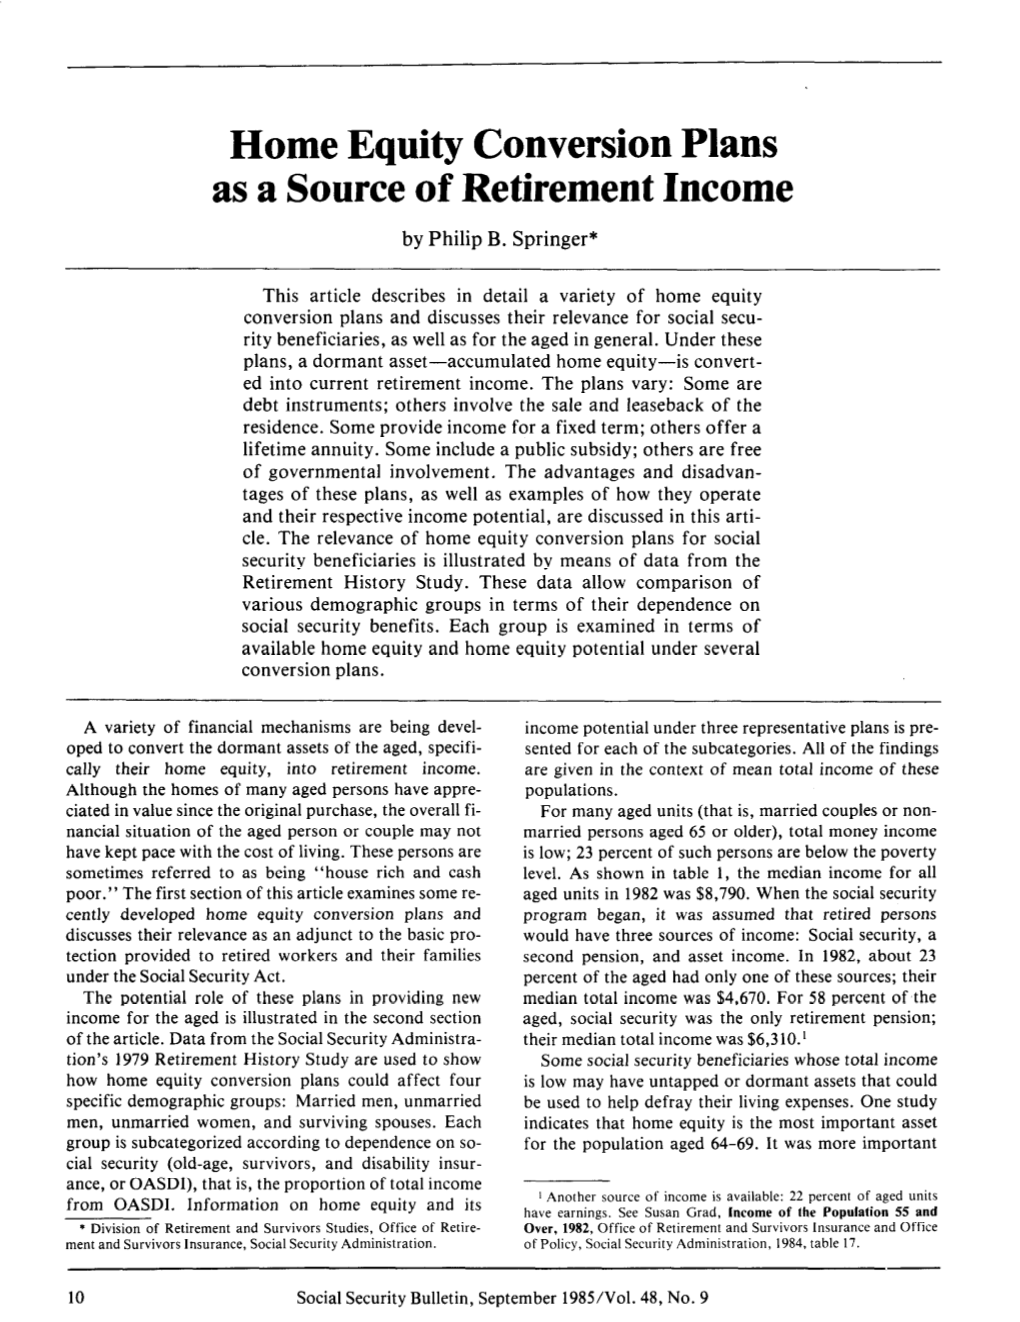 Home Equity Conversion Plans As a Source of Retirement Income by Philip B